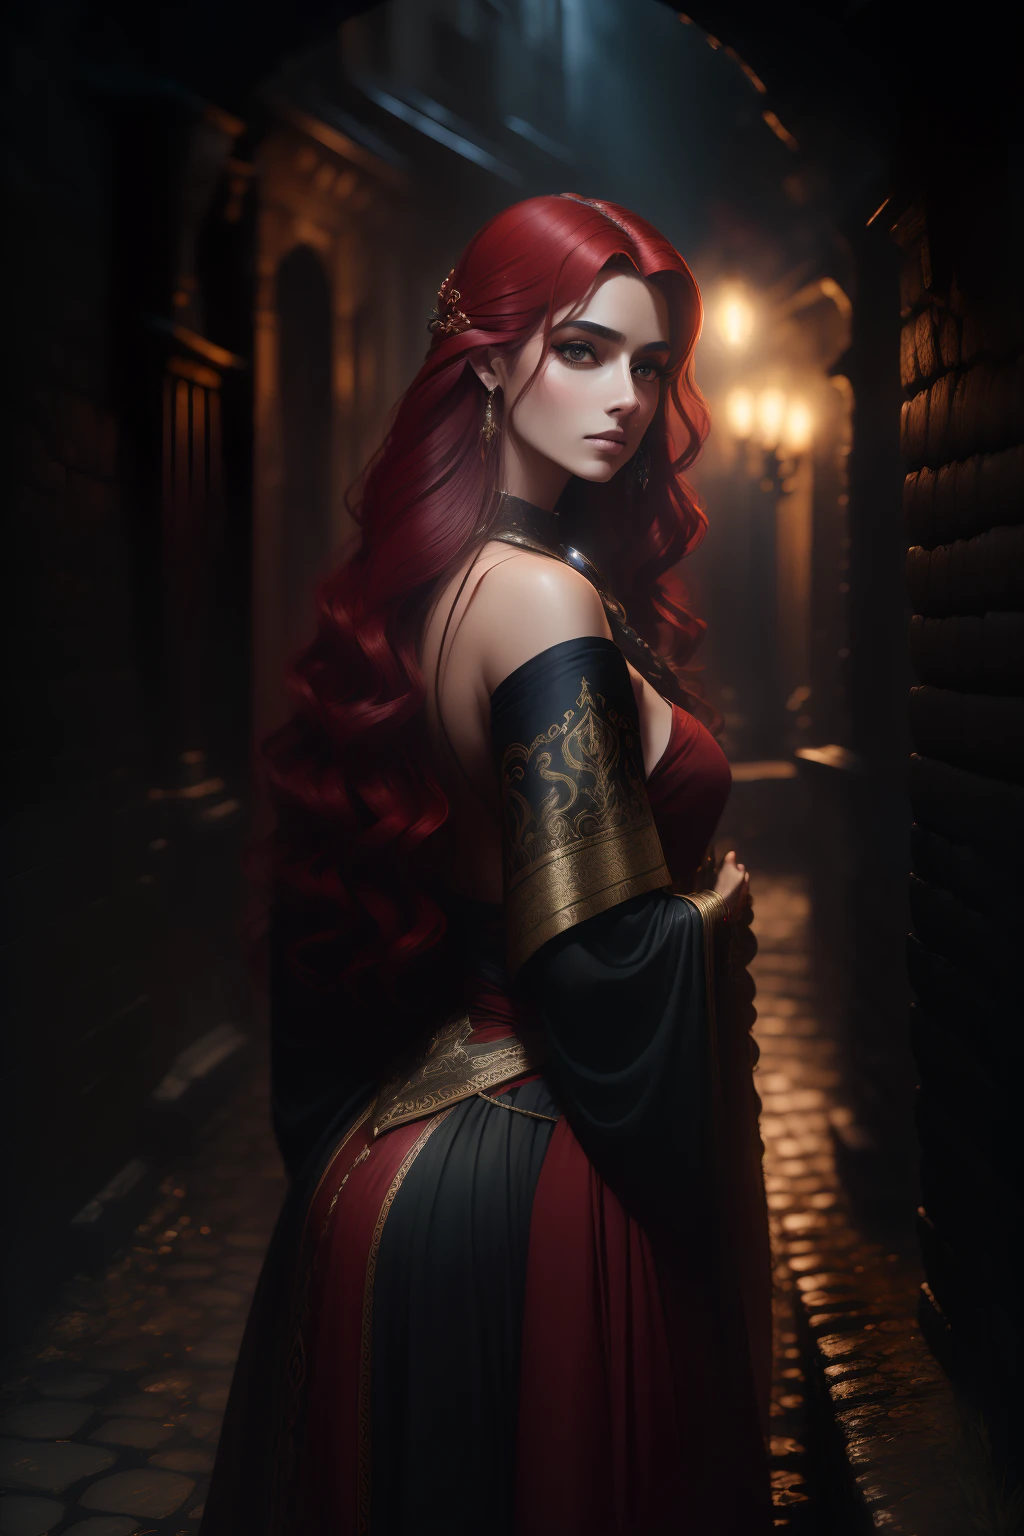 painting of a woman with red hair and a choke in a black dress, John Collier art style, maiden with copper hair, style of karol bak, a young redhead, portrait of a young witch, Non Bowater art style, Directed by: Roberto Lenkiewicz, brom gerald, Albert Lynch, portrait of princess merida, Dave Sim, Red-haired girl in a shadowy palace, black and purple velvet dress wearing a kokoshnic, luxury gypsy clothing, head adornment, Lace choker, Masterpiece artwork, highest quallity, (独奏), (face perfect: 1.3), (high détail: 1.2), dramatic, 1girl, angel, (pale skinned), long redhead hair, Red hair escuros, (Breasts huge), light eyebrows, long hair, natta, purple and black medieval gypspy outfit, lots of jewelry, head adornments, eyes browns, umbigo inked, pouty lips, Curvilinear, (arms behind back: 1.4), inked, Palace Detailed Background, art by artgerm and greg rutkowski, cinematic lighthing, , lo fashion, BALENCIAGA, Alexander McQueen, glitter, Red hair acobreados, copper red hair, Red hair, red-haired woman, Red hair bonitos, ruiv